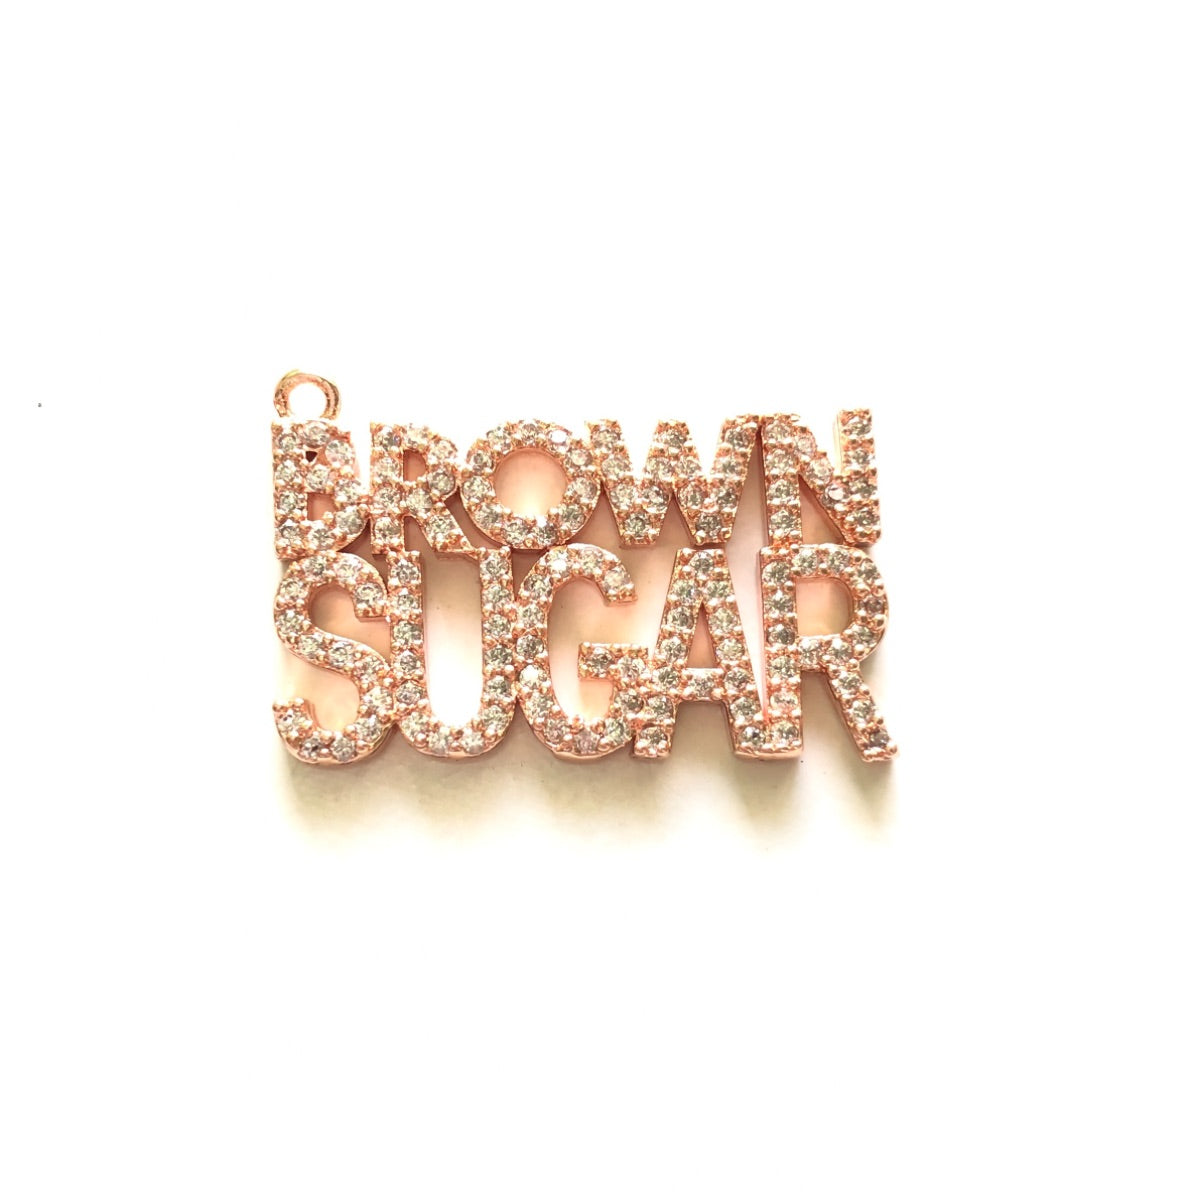 10pcs/lot 26.5*18mm CZ Paved Brown Sugar Charms Rose Gold CZ Paved Charms On Sale Words & Quotes Charms Beads Beyond